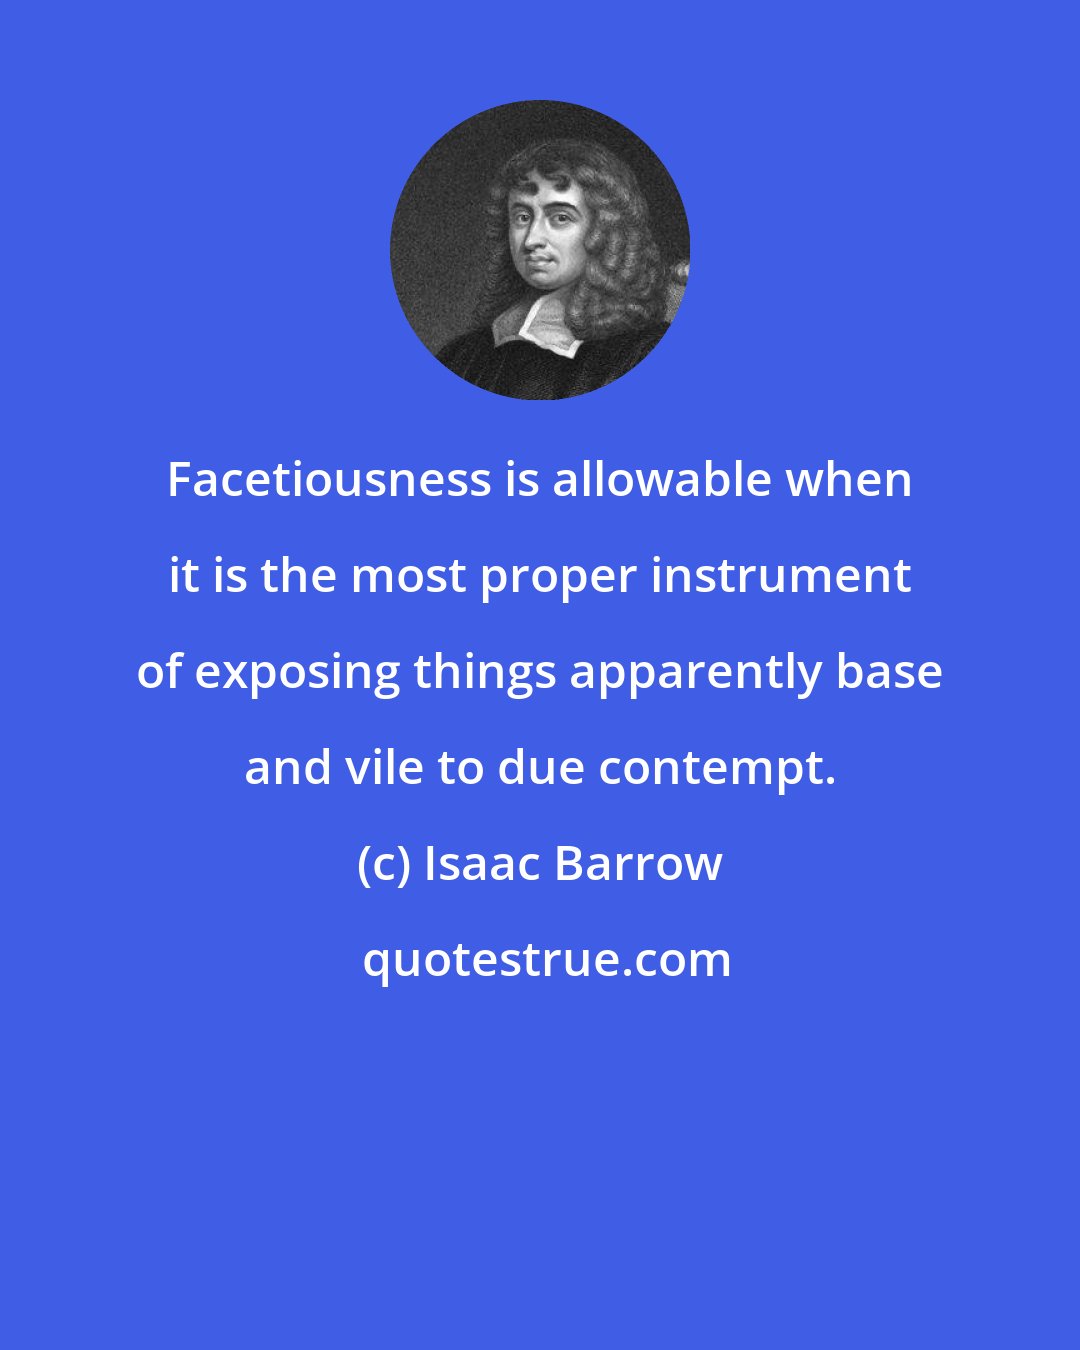 Isaac Barrow: Facetiousness is allowable when it is the most proper instrument of exposing things apparently base and vile to due contempt.